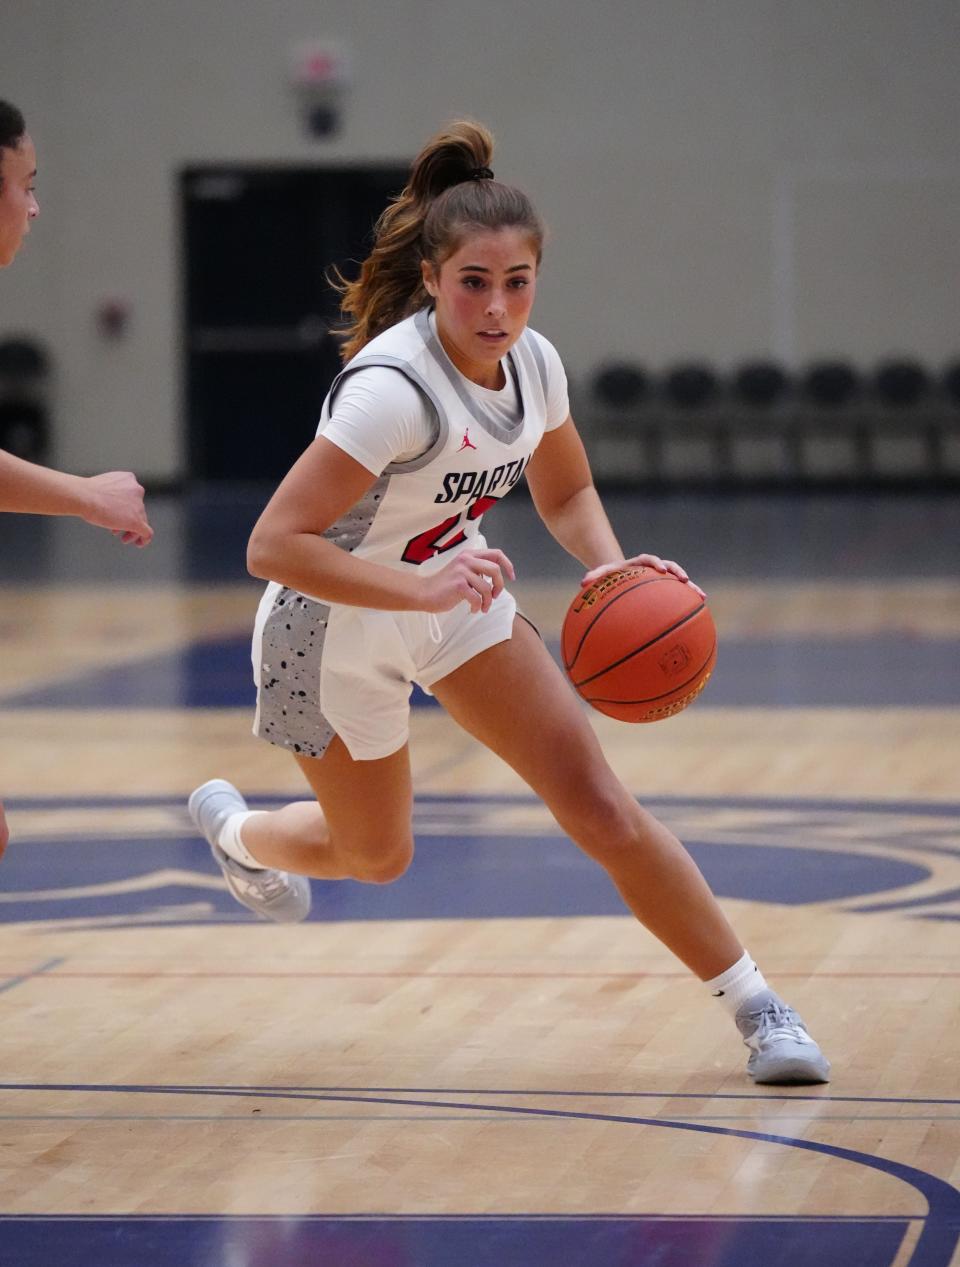 Brookfield East's Shae Kelley has over 900 points, 400 rebounds and 400 steals in three seasons and has generated plenty of interest in Division 1 offers.